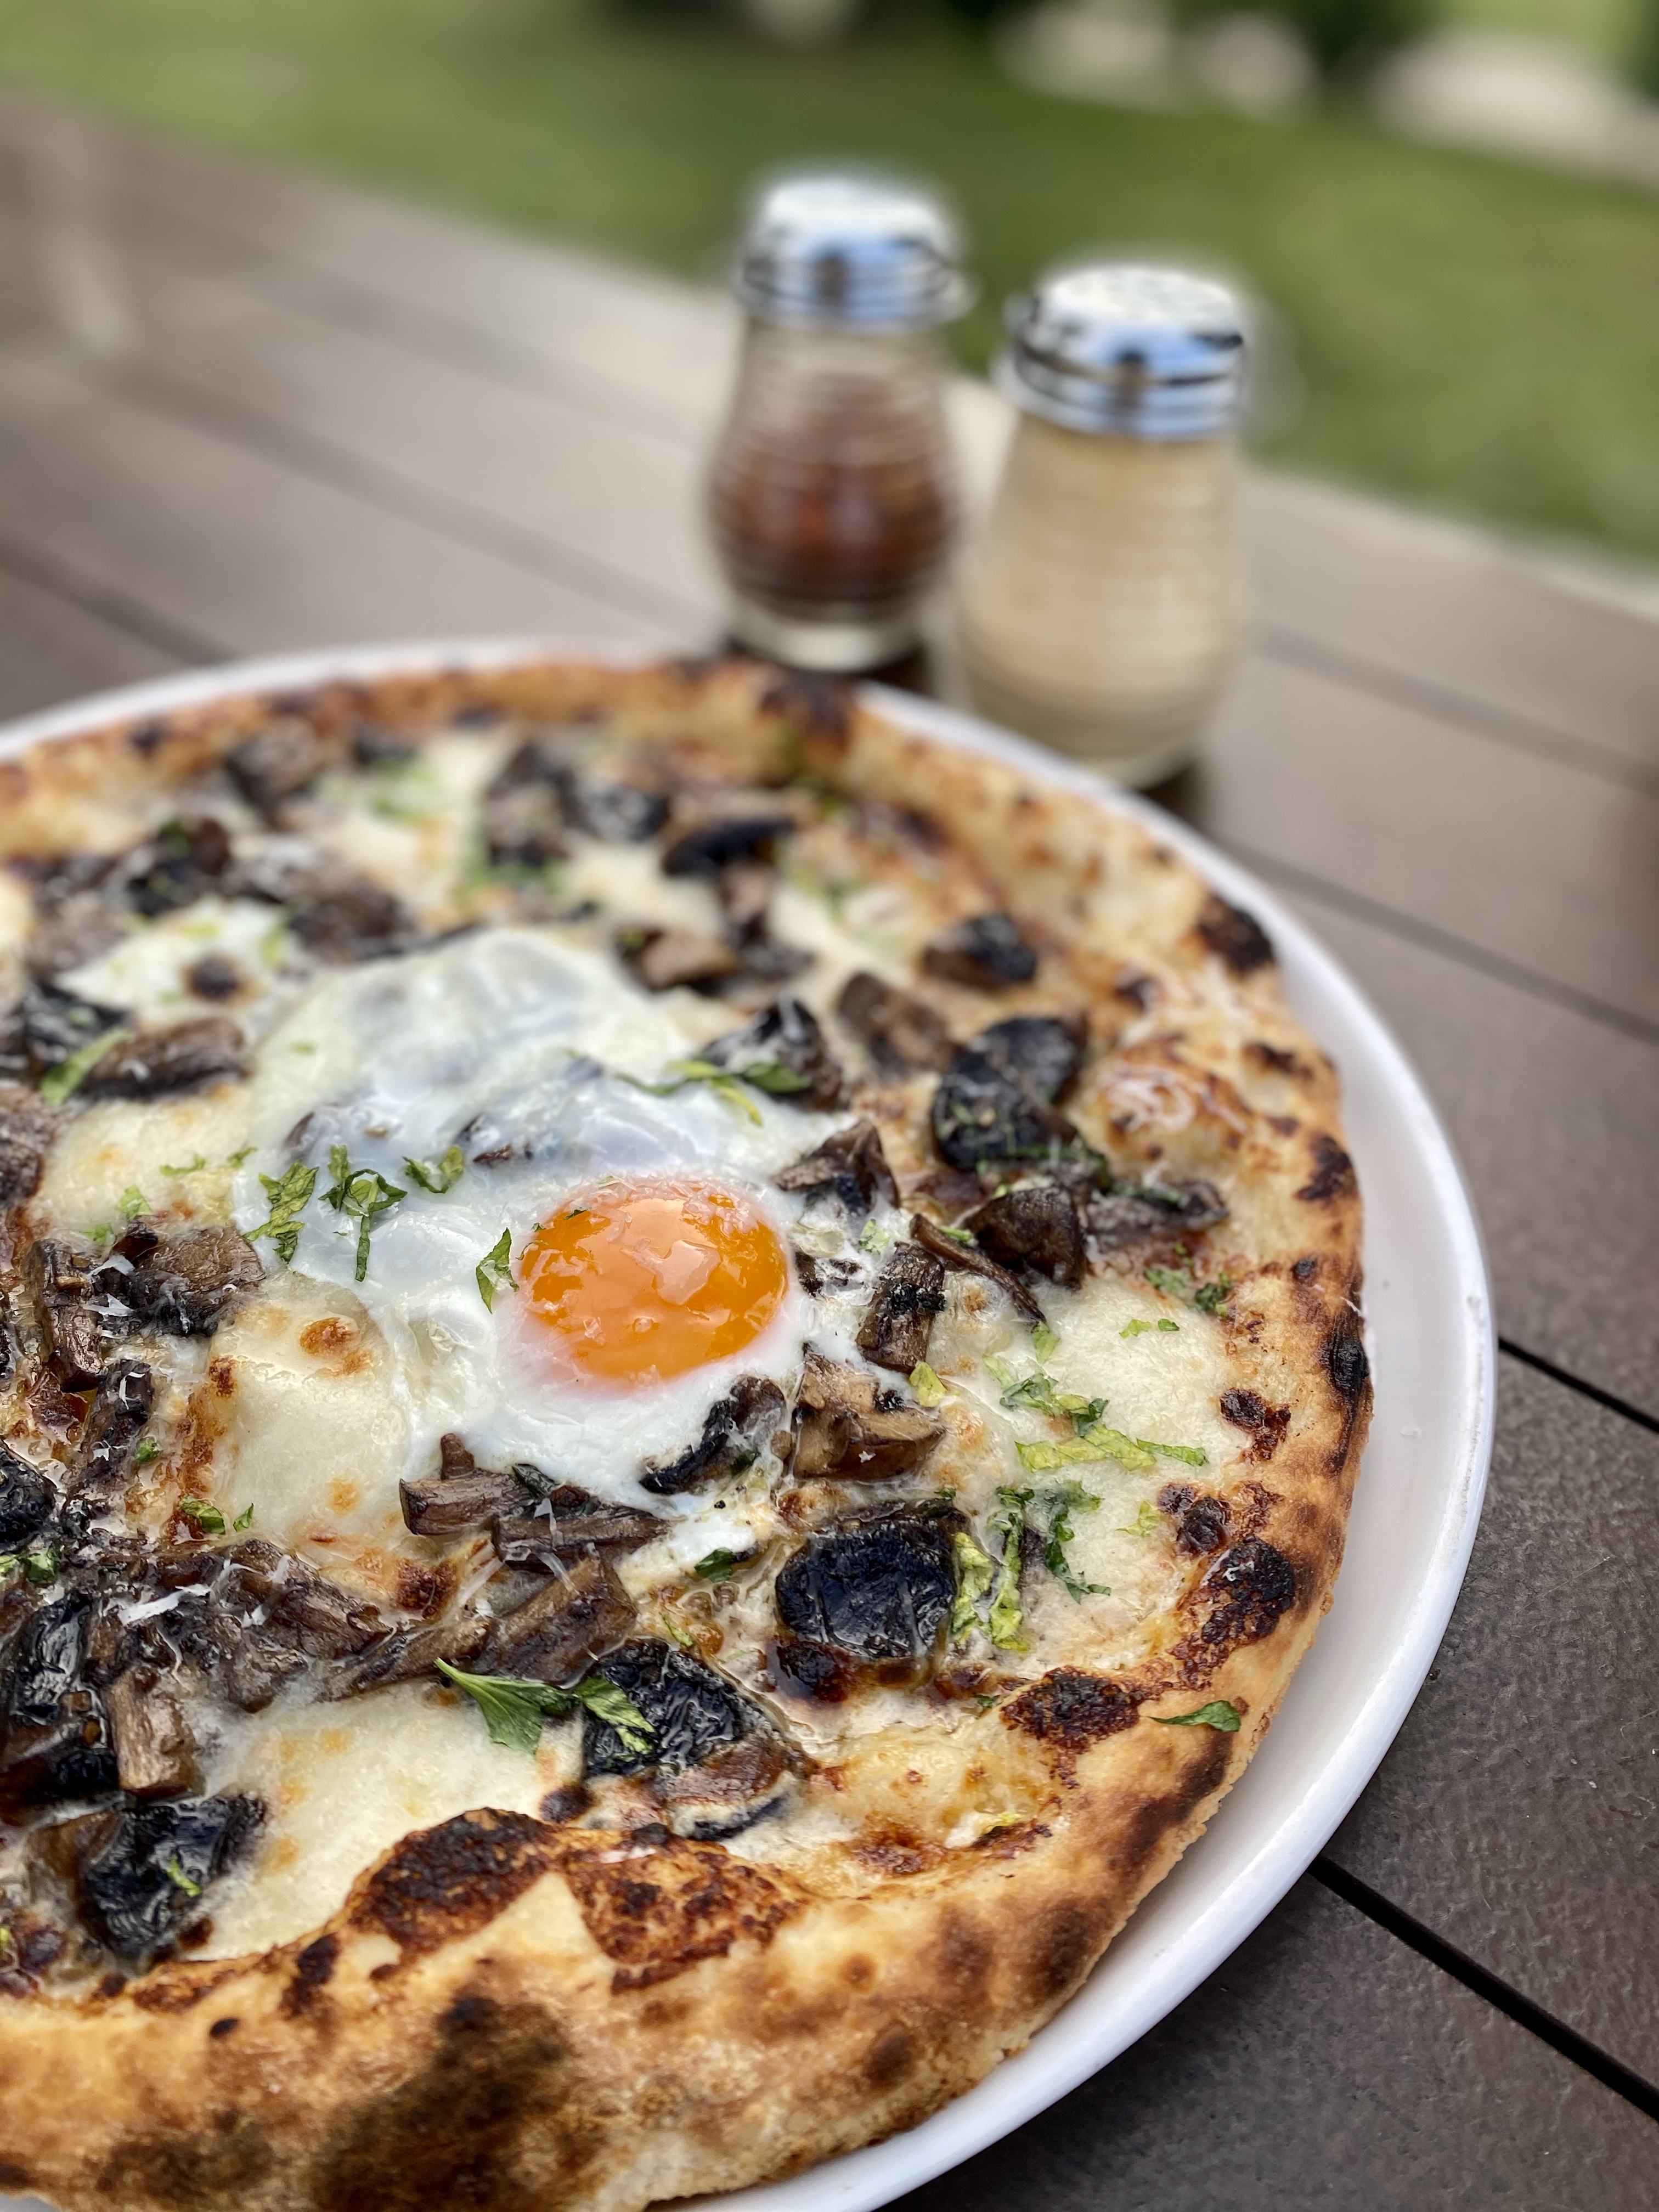 February's Special – White Truffle and Mushrooms with Egg